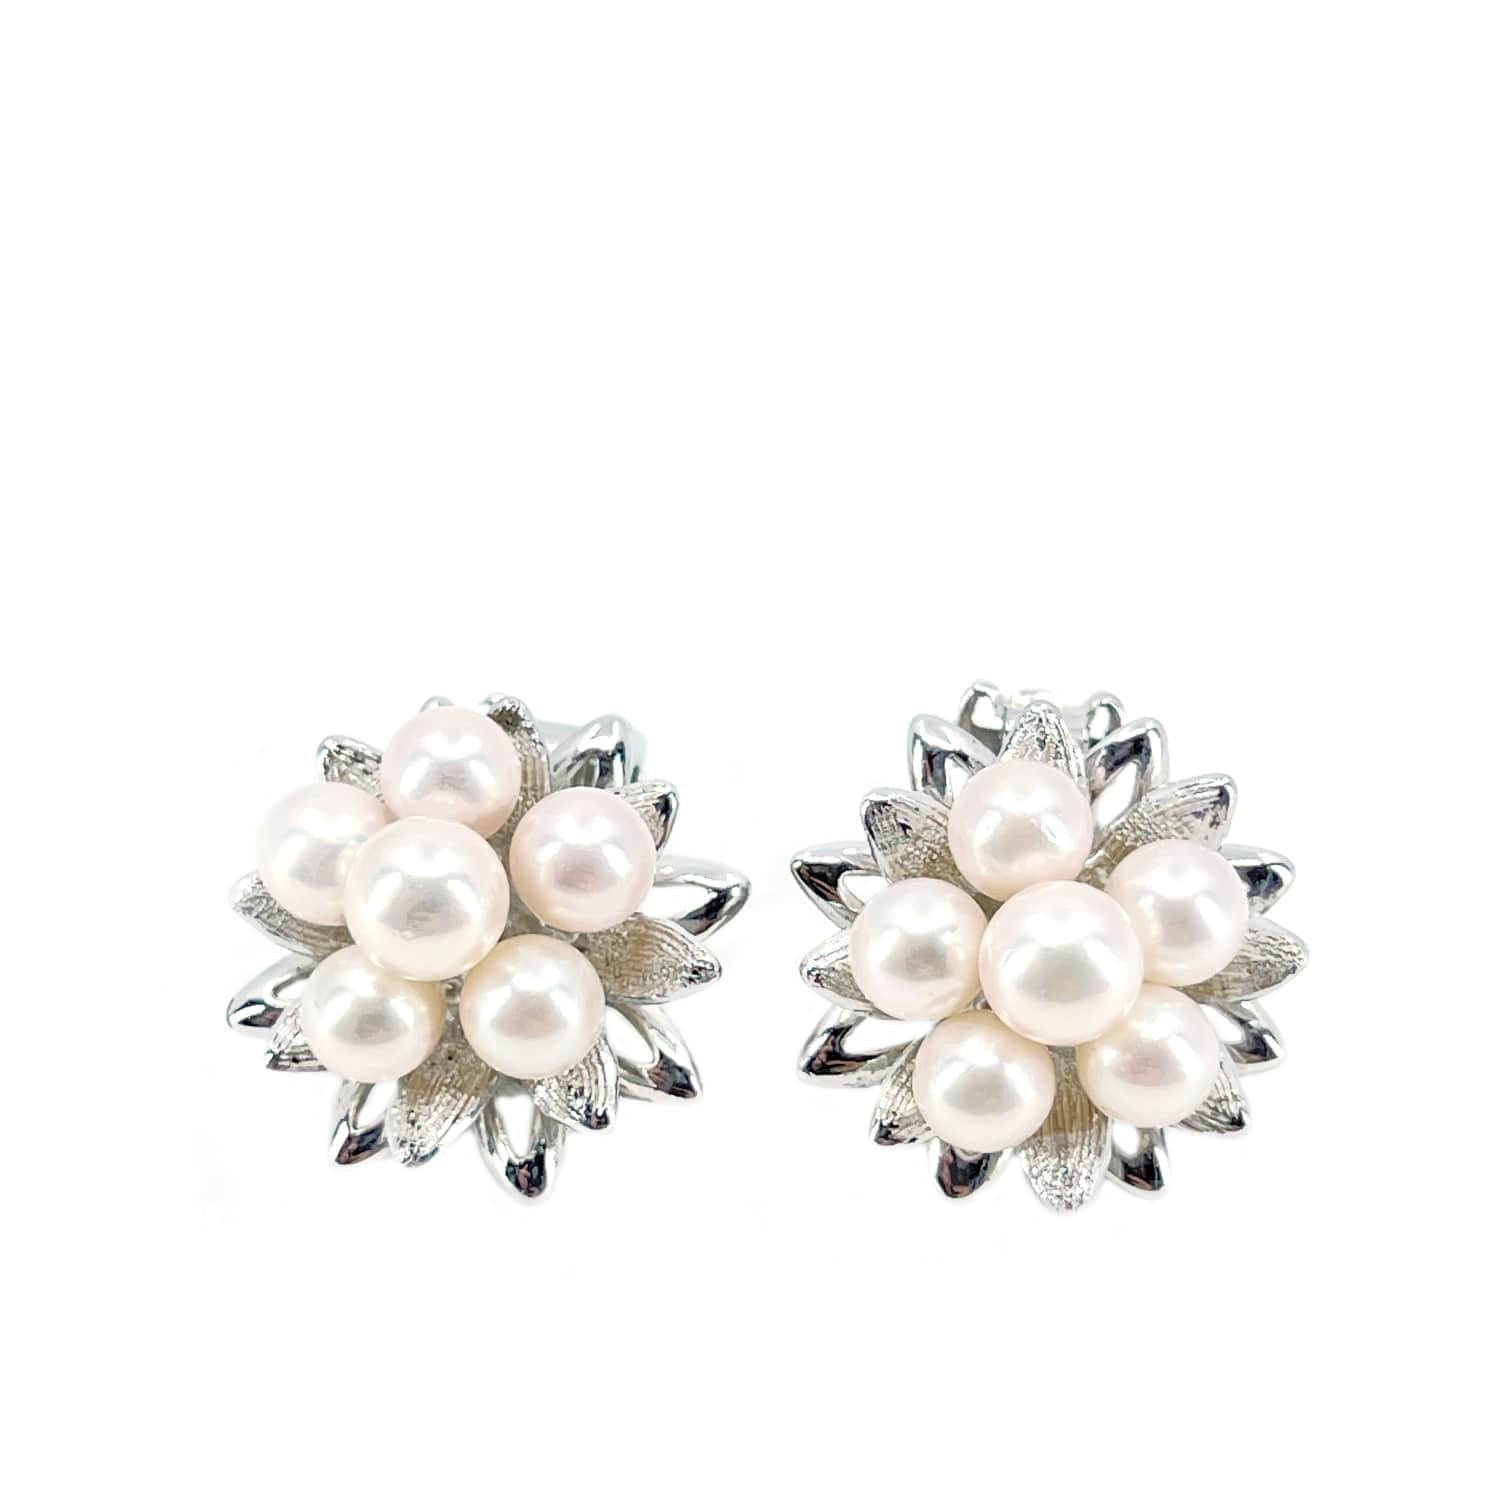 Cherry Blossom Akoya Saltwater Cultured Pearl Cluster Clip Earrings- Sterling Silver